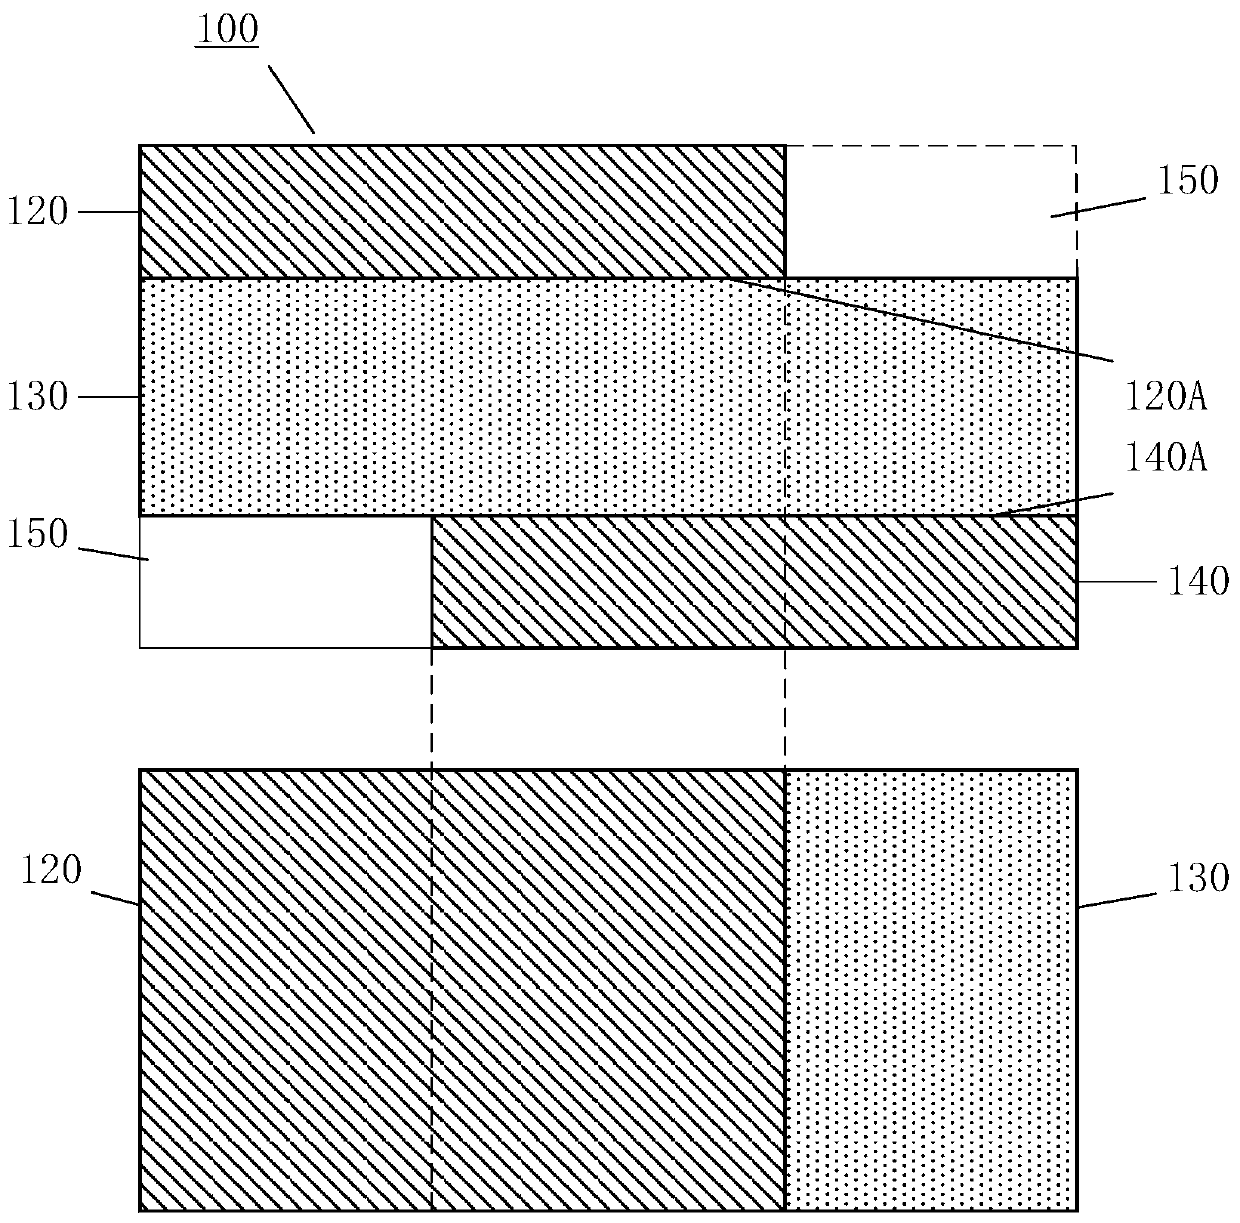 Vertical electrode configuration structure for nanoscale phase change memory cell